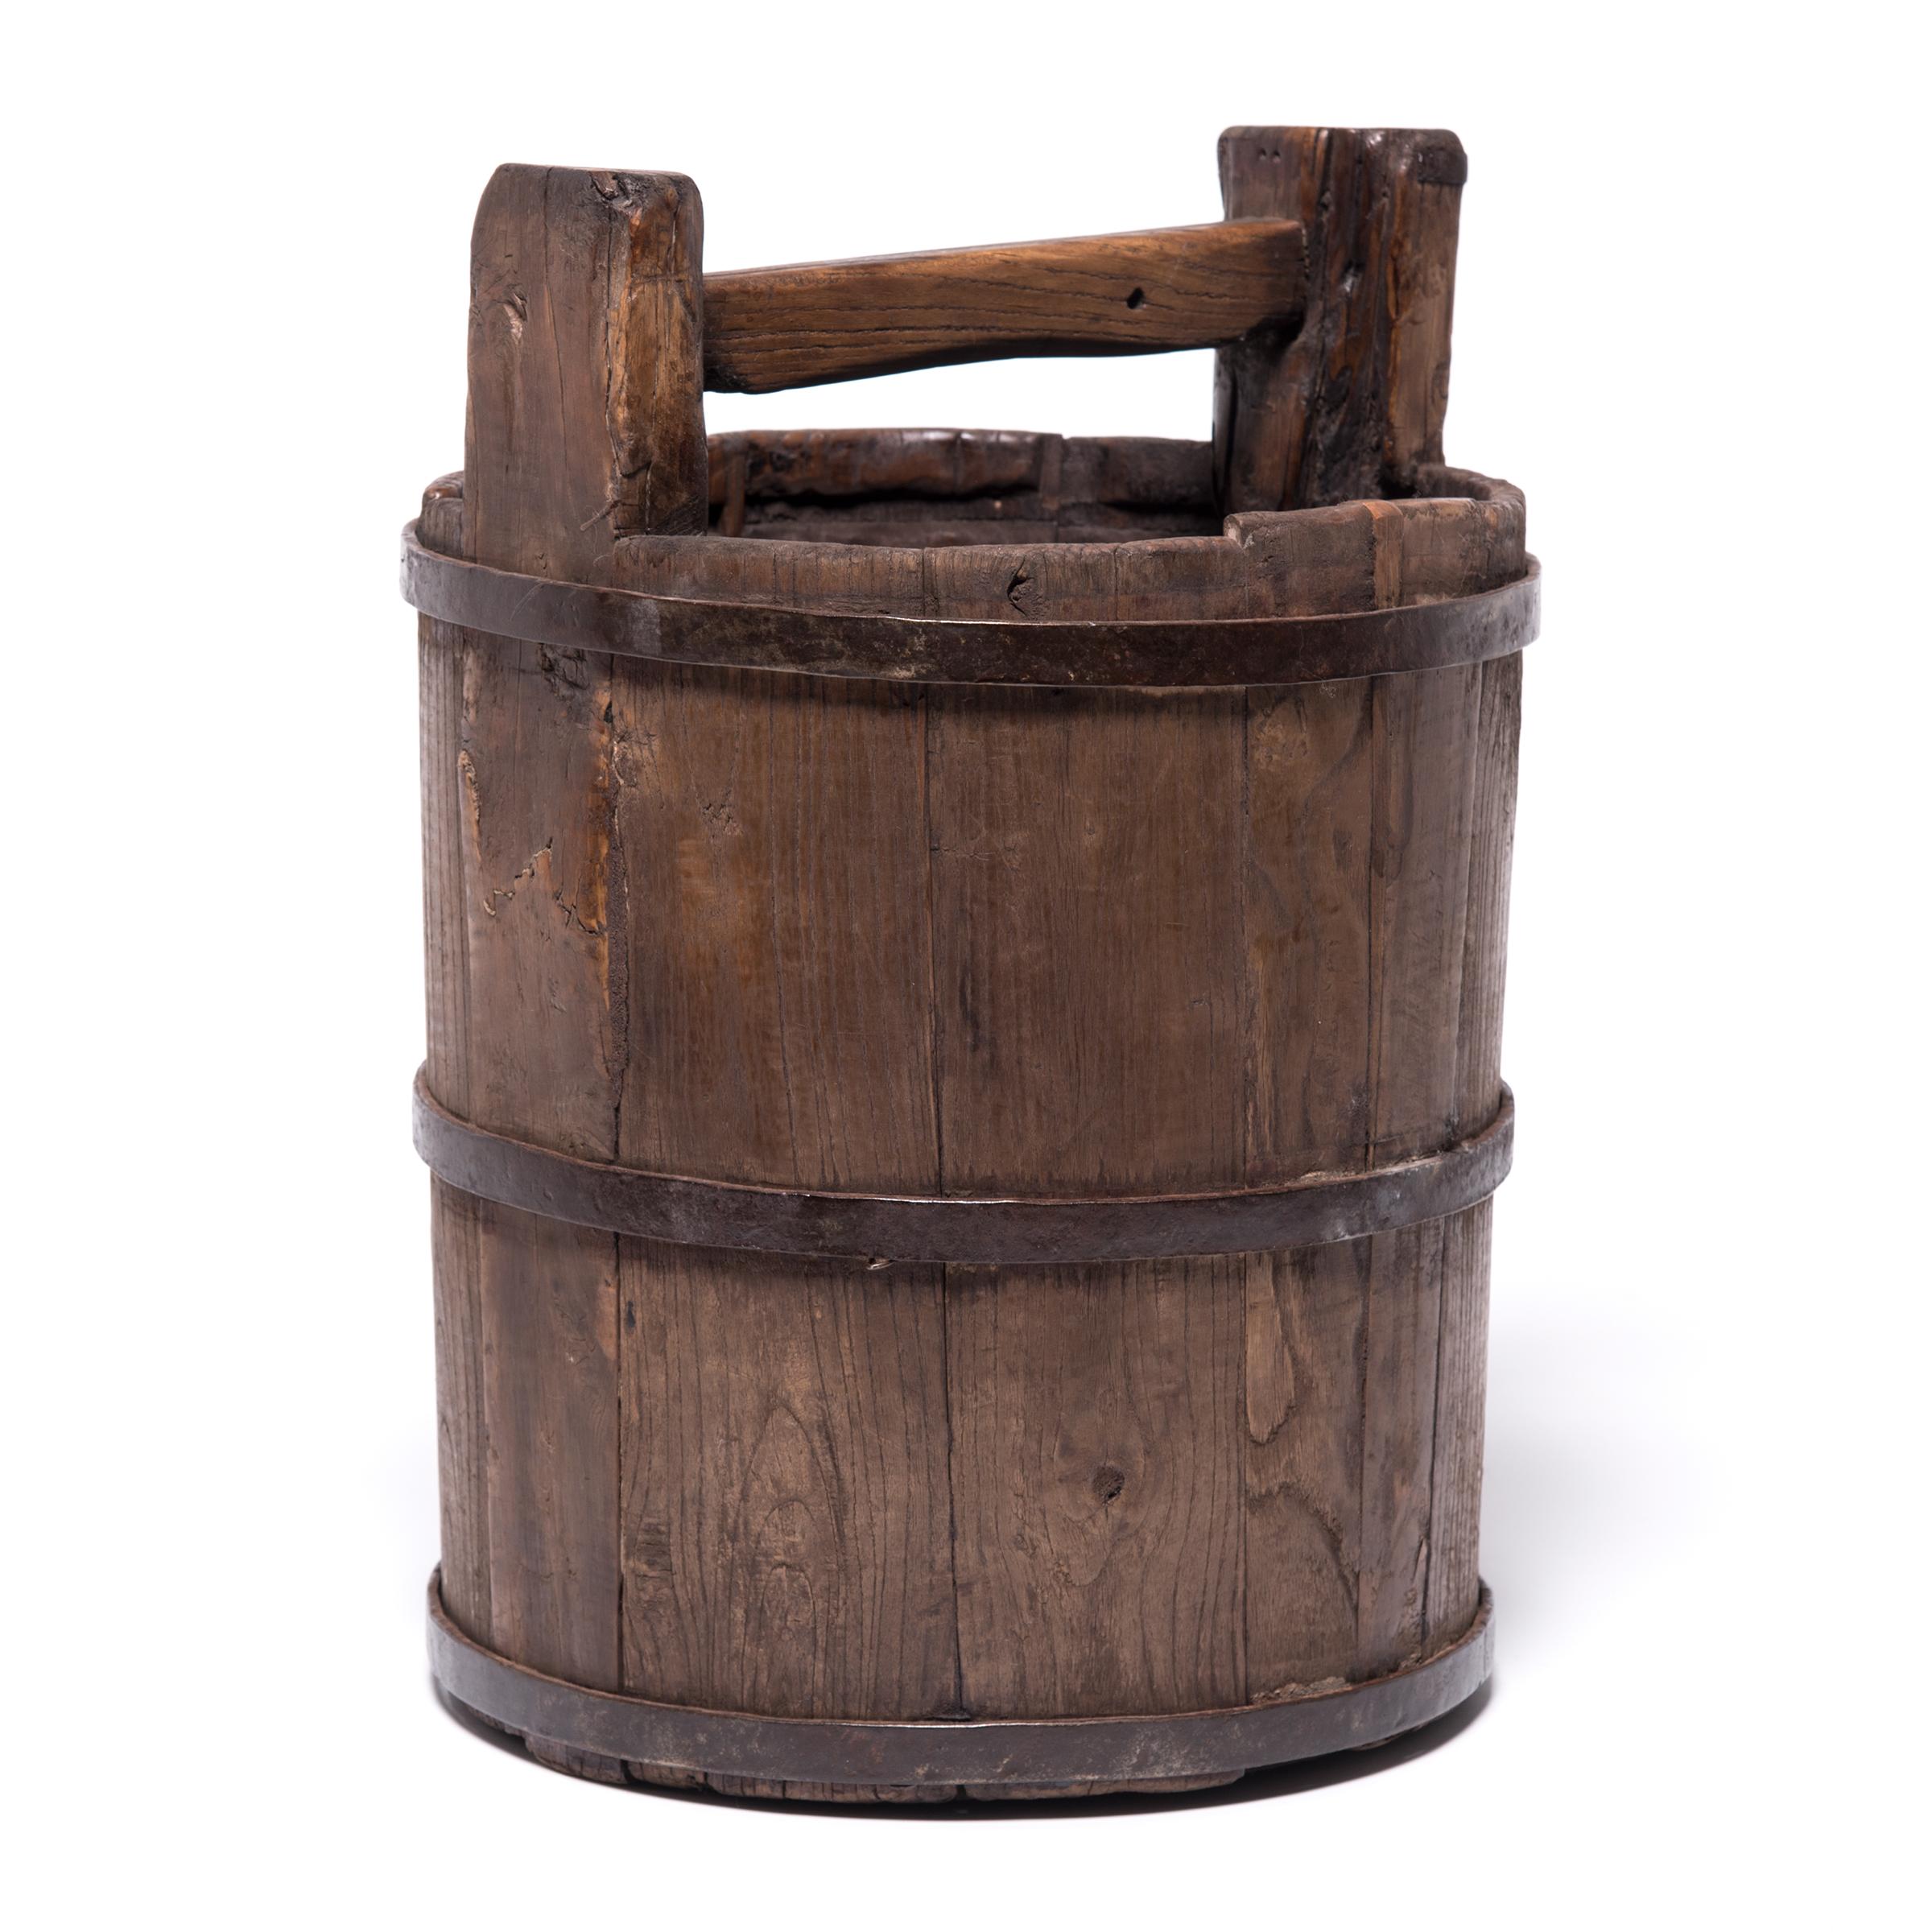 Beautifully aged with a warm patina, this Qing-dynasty bucket draws attention to the ingenuity of its manufacture, consisting of staves of cypress bound with iron rings. Conjuring up images of the water-bearing figures illustrated in painted